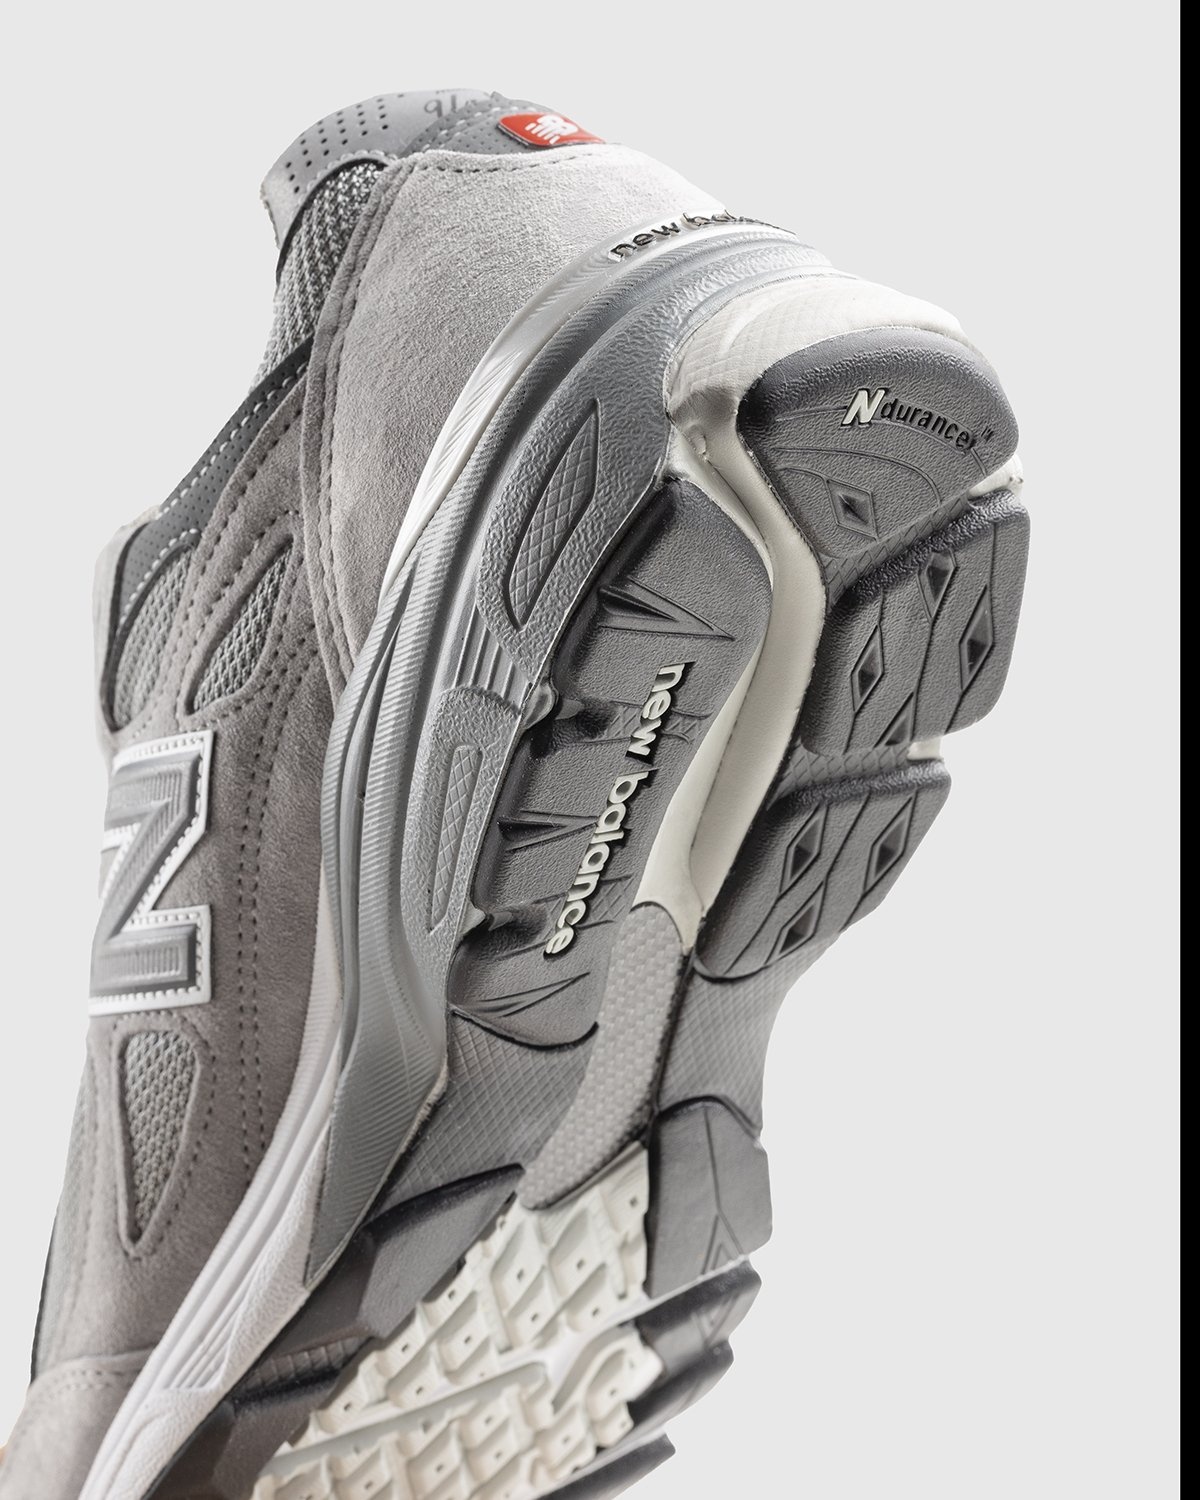 New Balance – M990GY3 Grey - Low Top Sneakers - Grey - Image 6